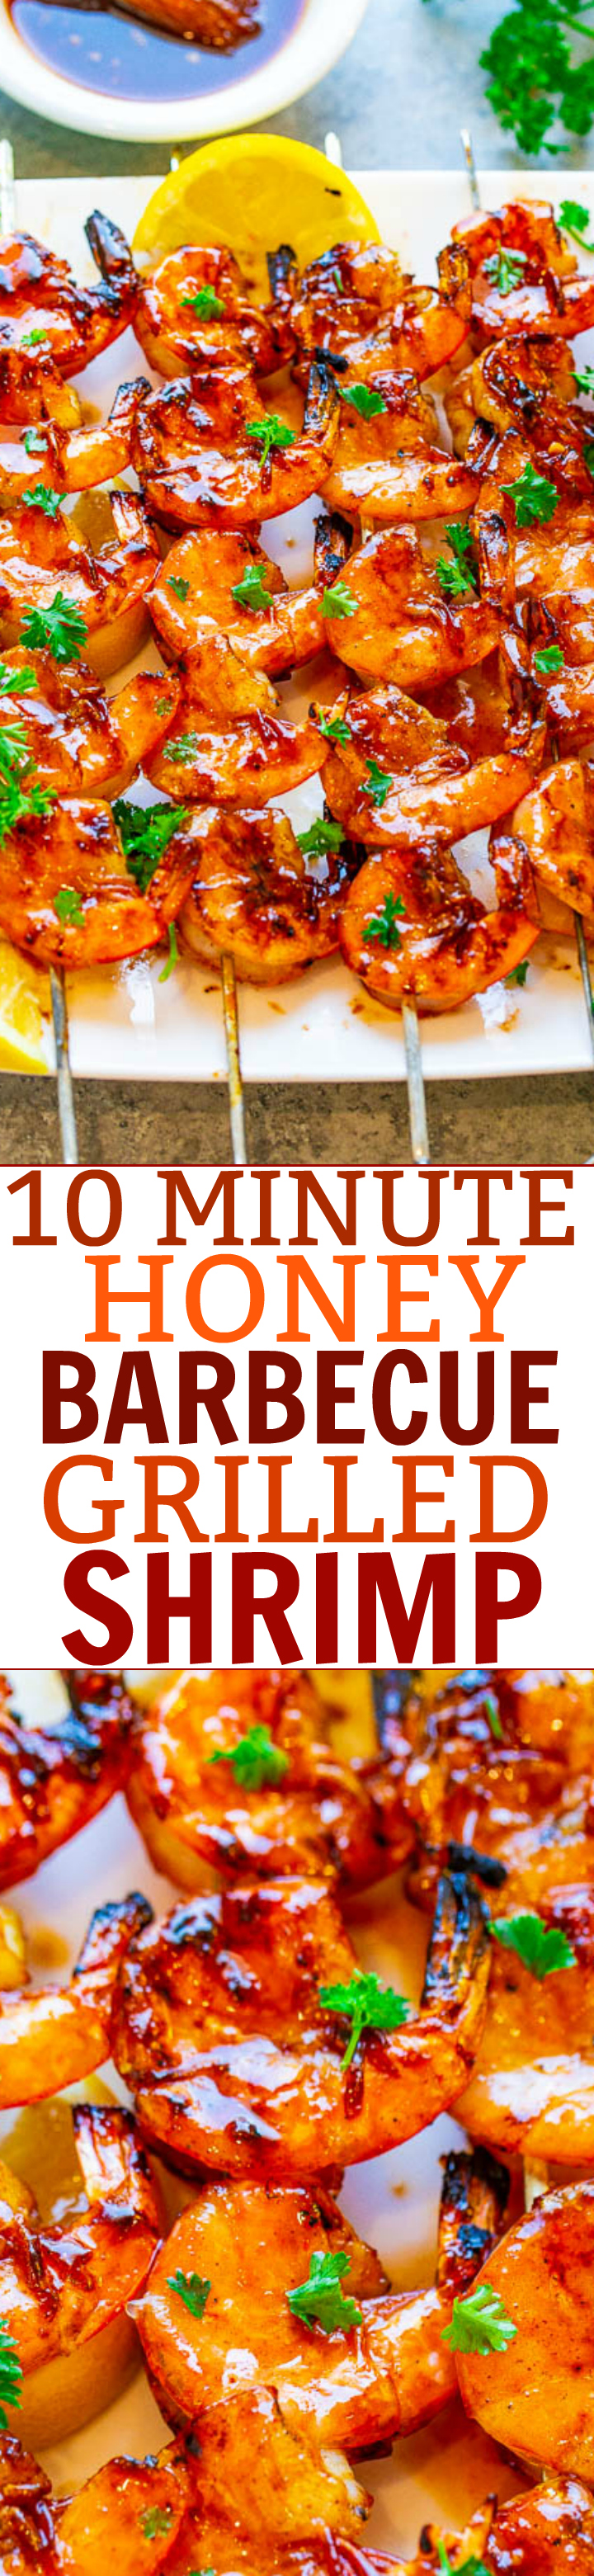 10-Minute Honey Barbecue Grilled Shrimp - Fast, EASY, healthy, ready in 10 minutes, and the perfect way to enjoy shrimp!! Tender, juicy, and full of such great FLAVOR from the barbecue sauce and honey!!